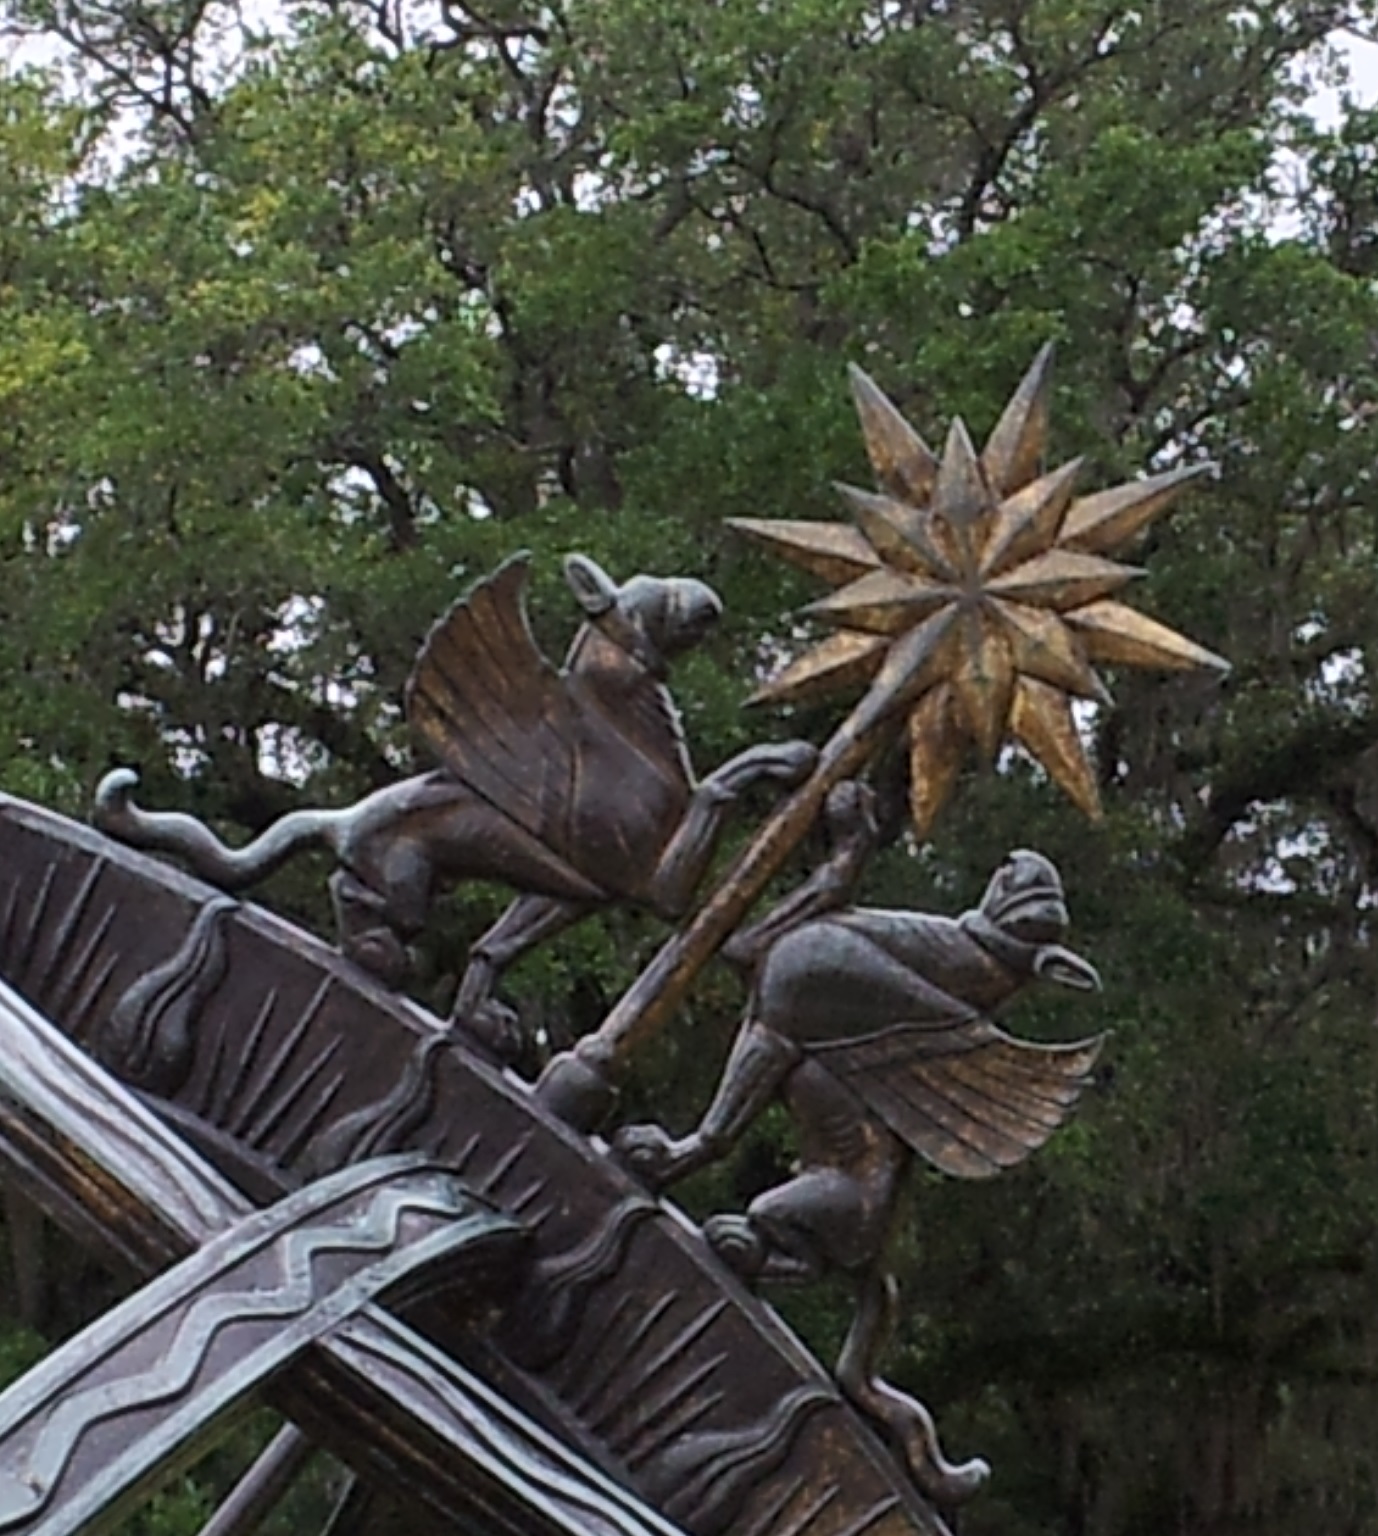 Cycle of Life by Paul Howard Manship (sculpture)